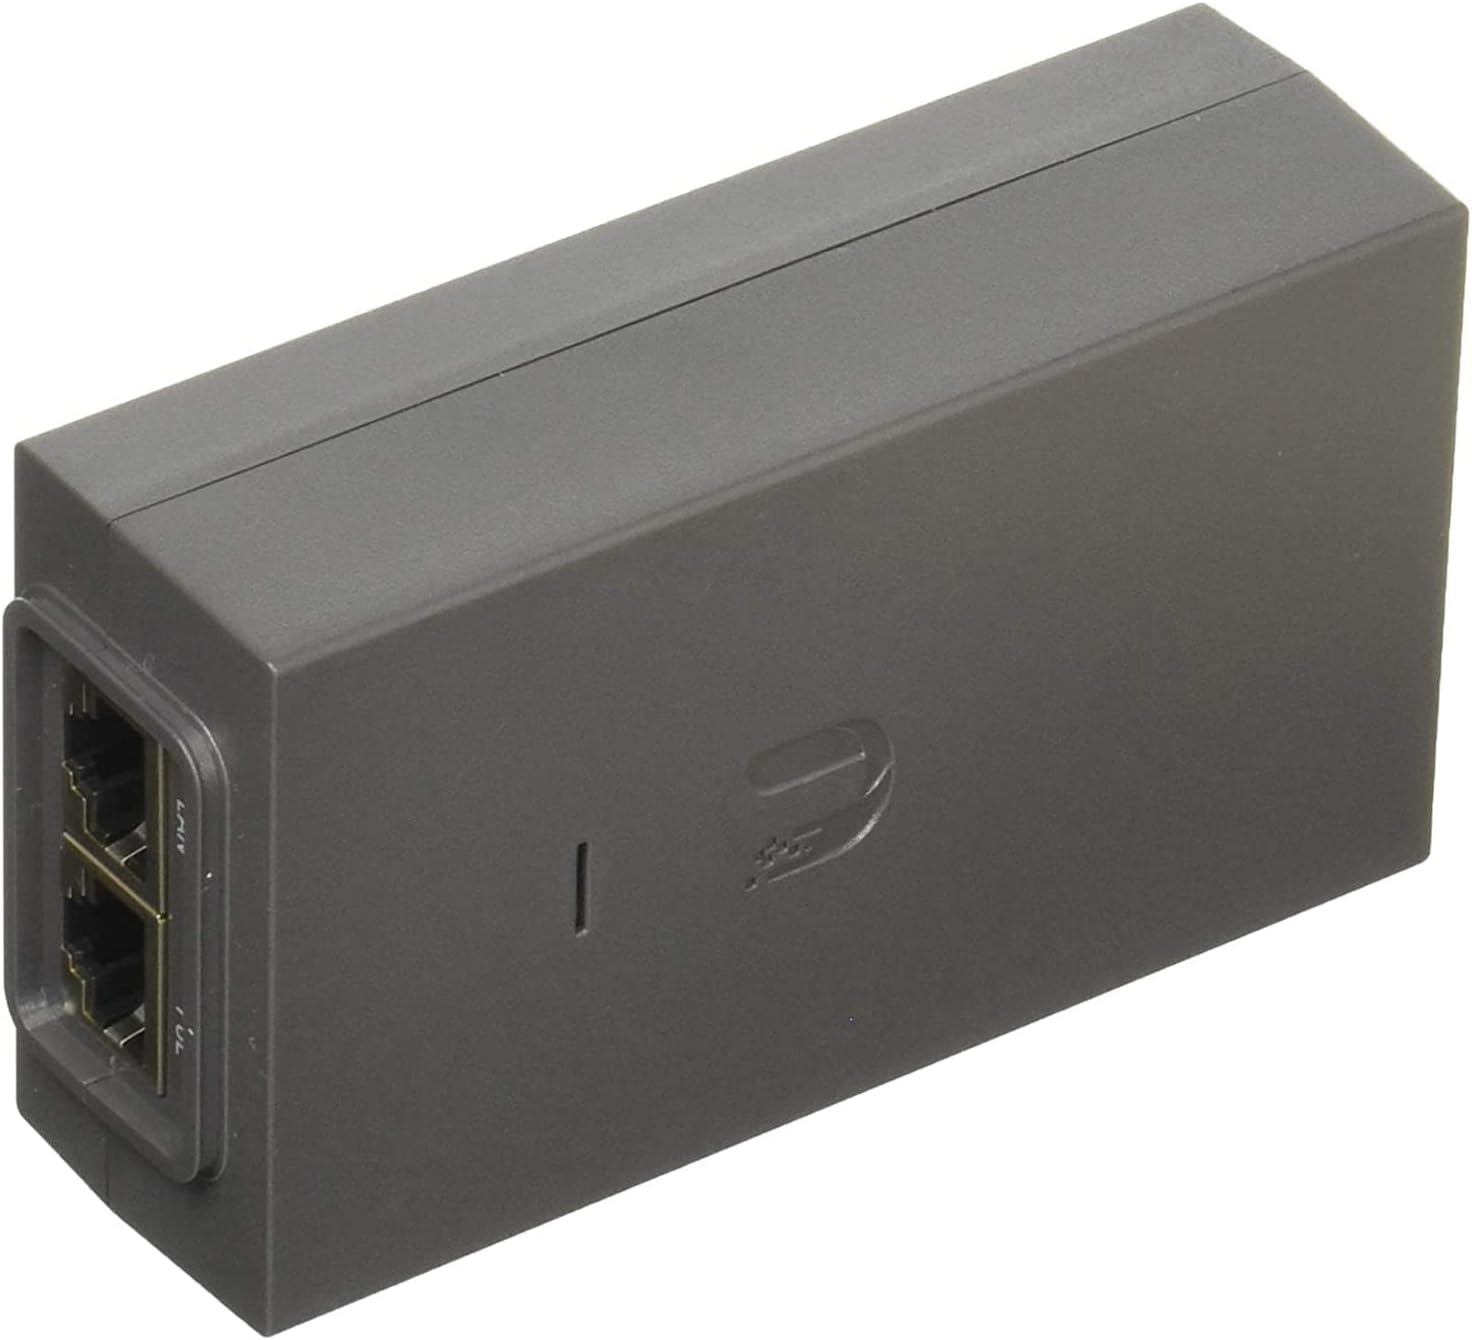 Ubiquiti POE-50-60W Networks 50 VDC 60 W Power over Ethernet Injector